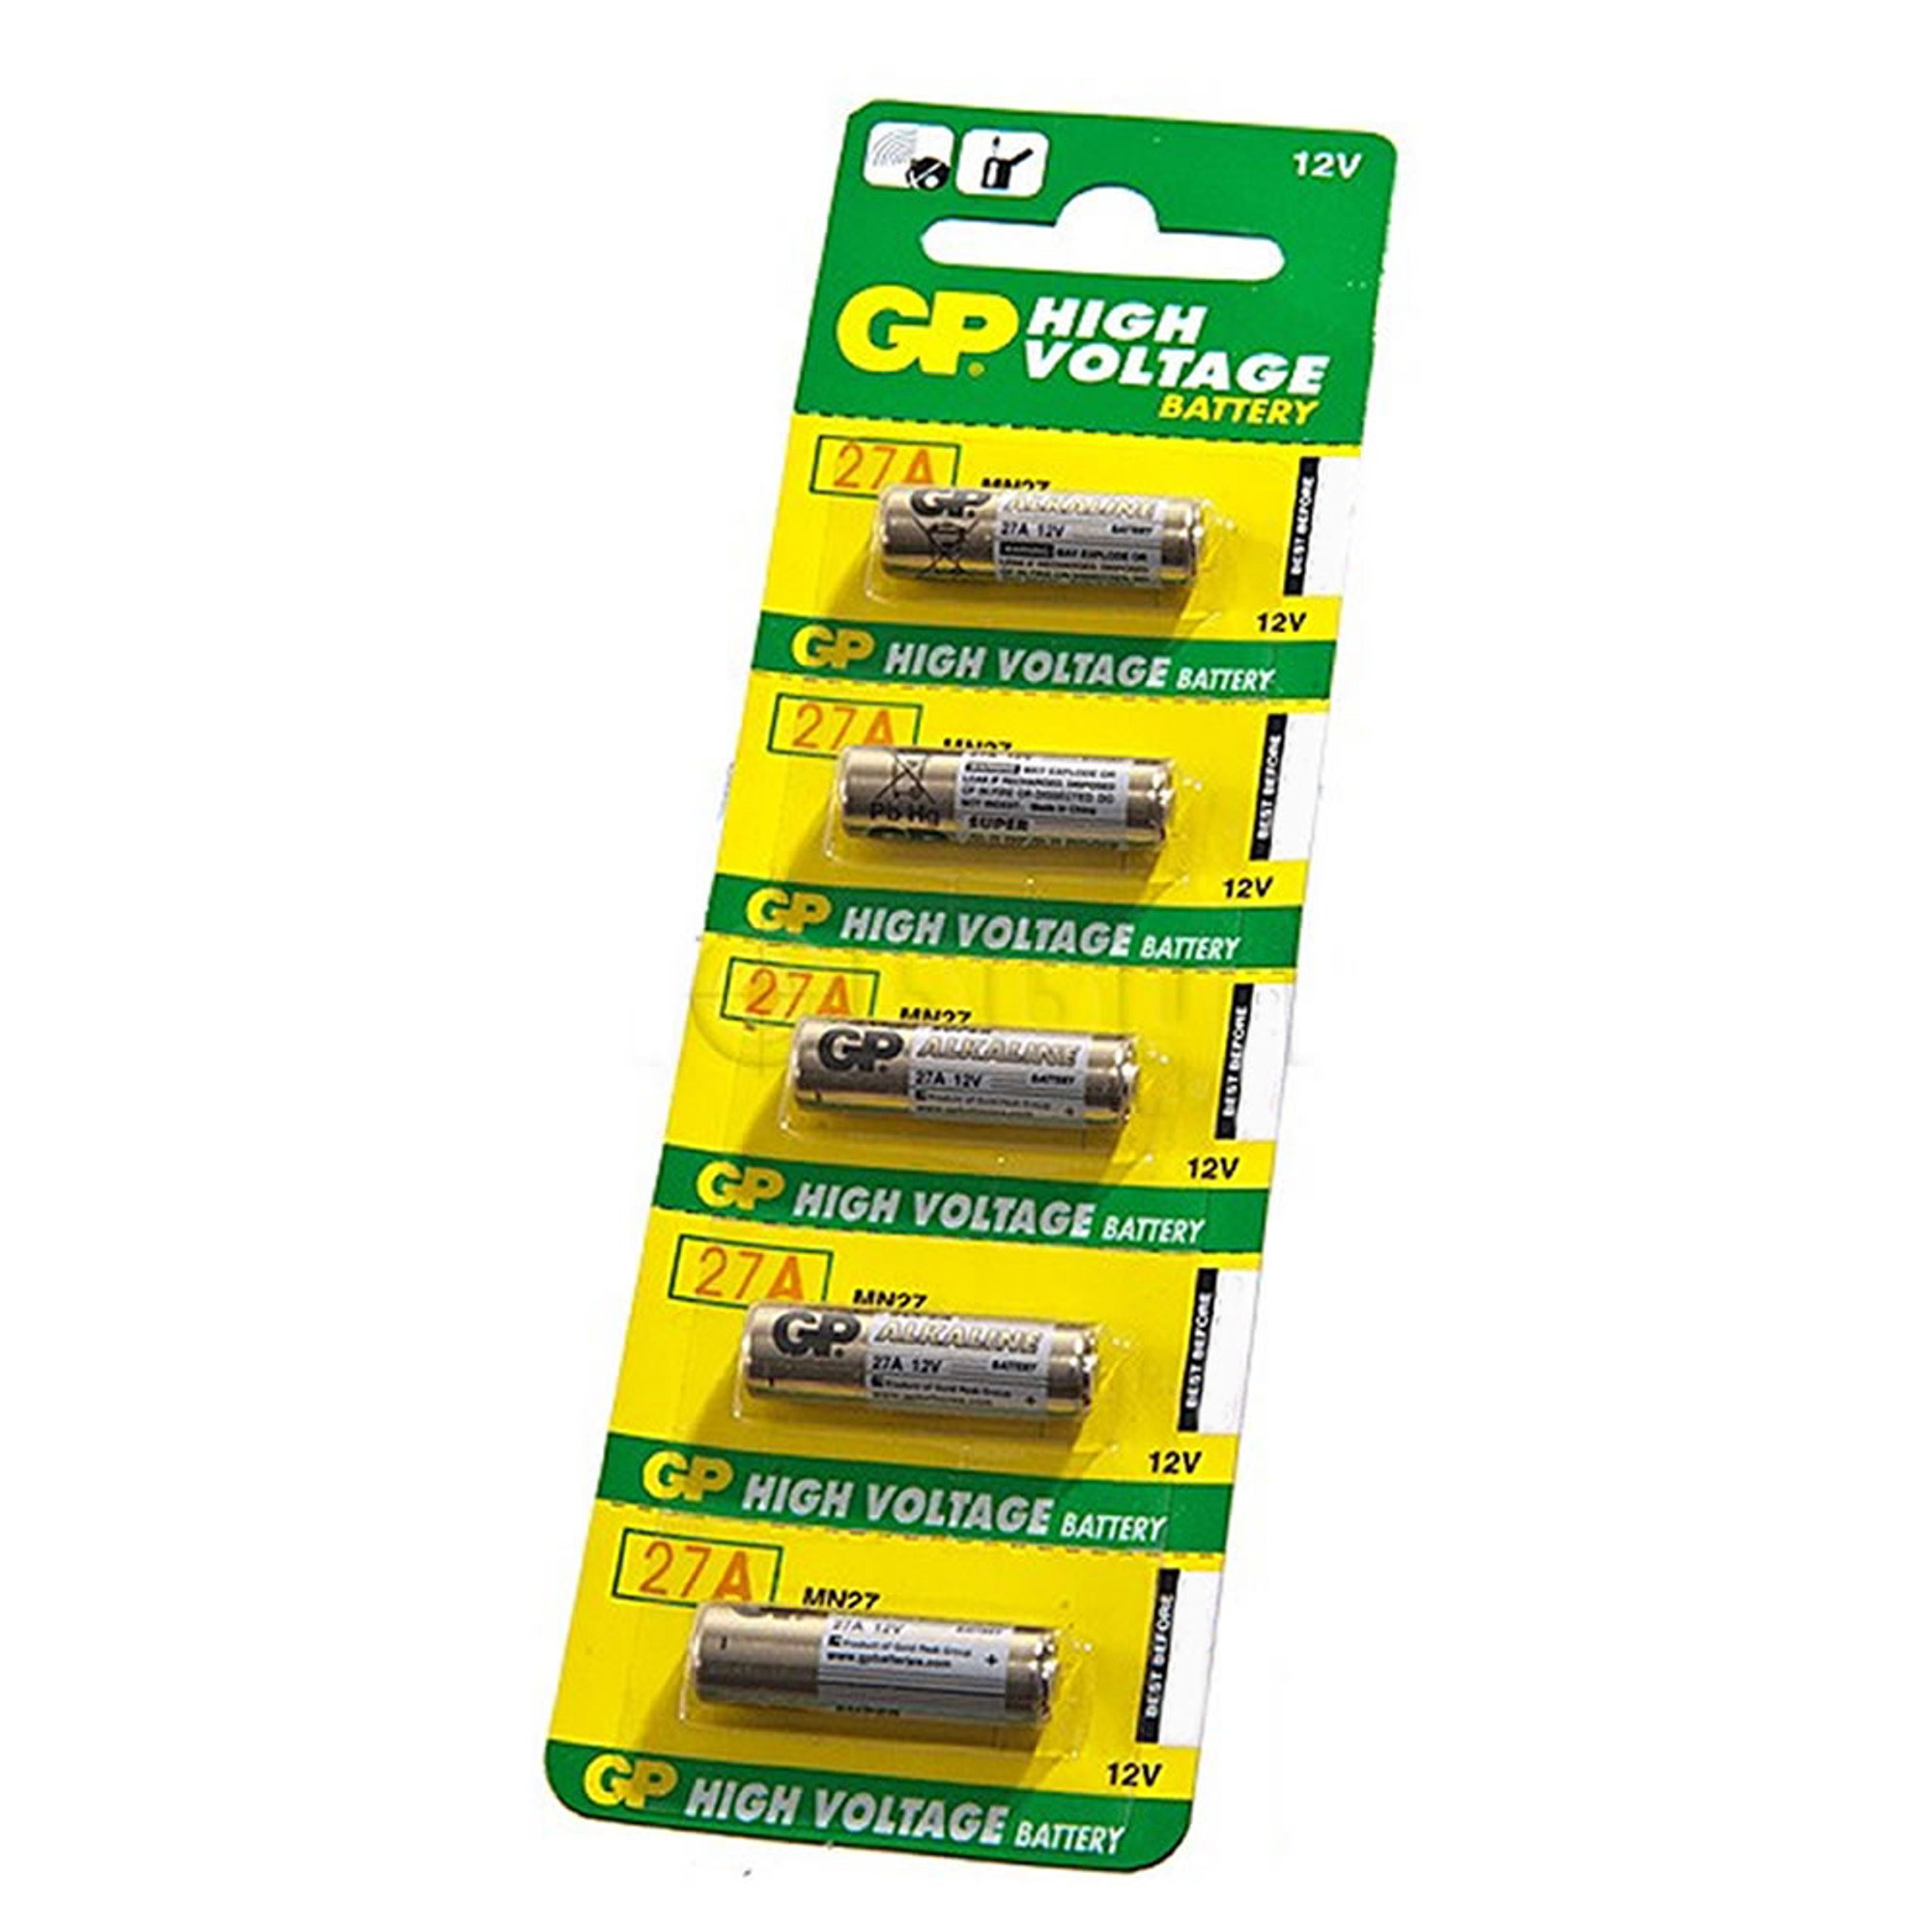 GP27A - GP 27A 12V Alkaline - (Price is per piece) - Vancouver Battery Corp